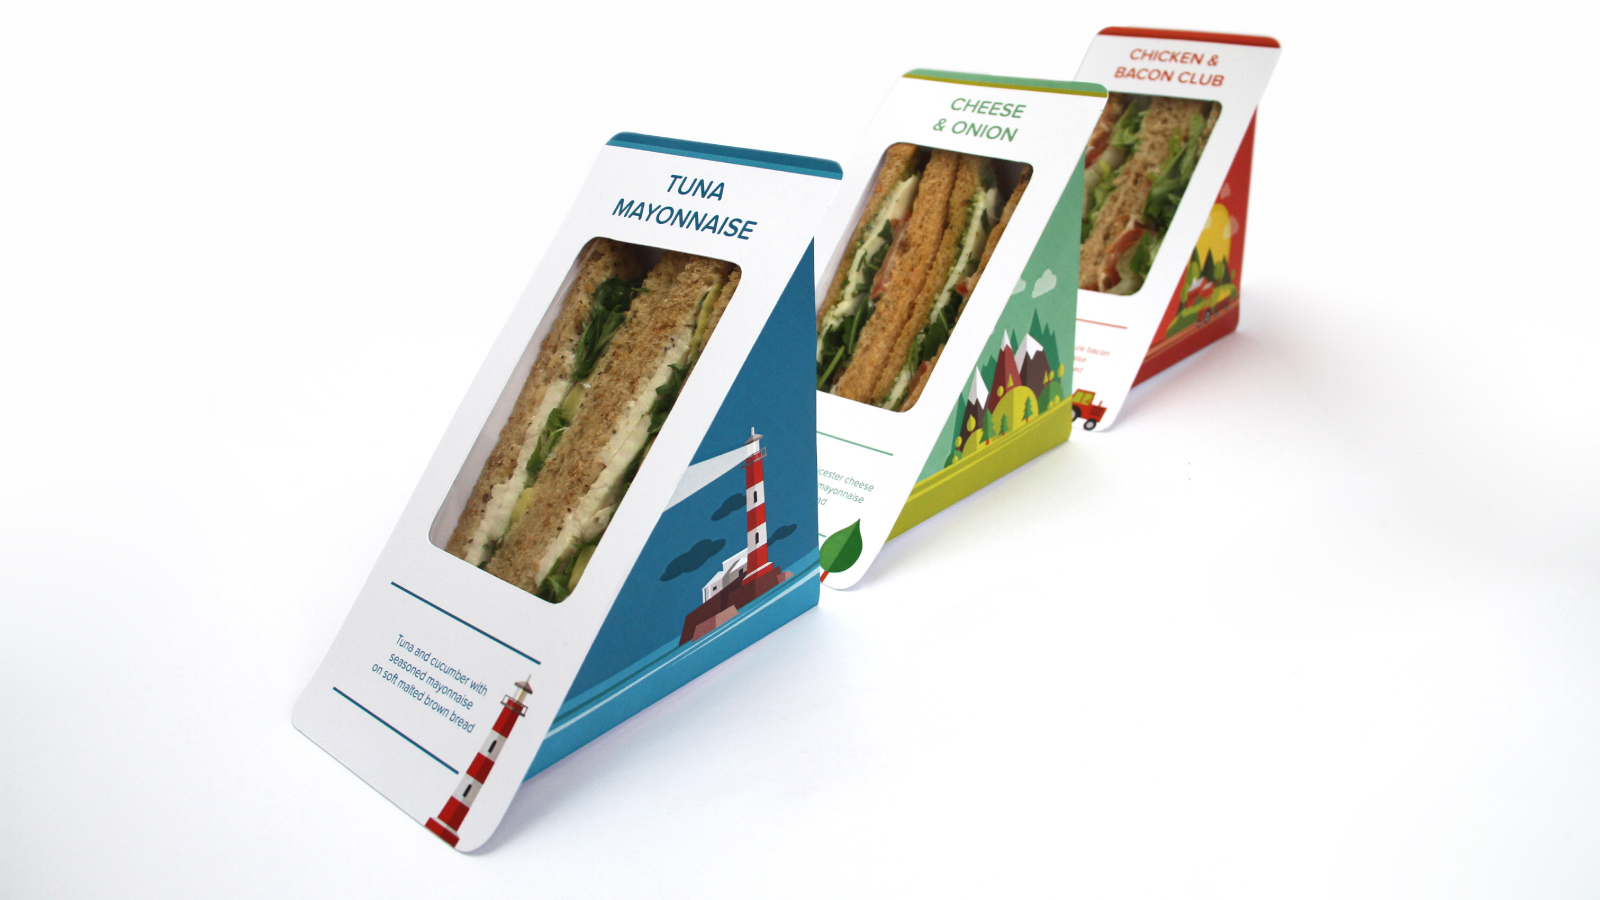 Creative sandwich pack designs with stand out illustrations